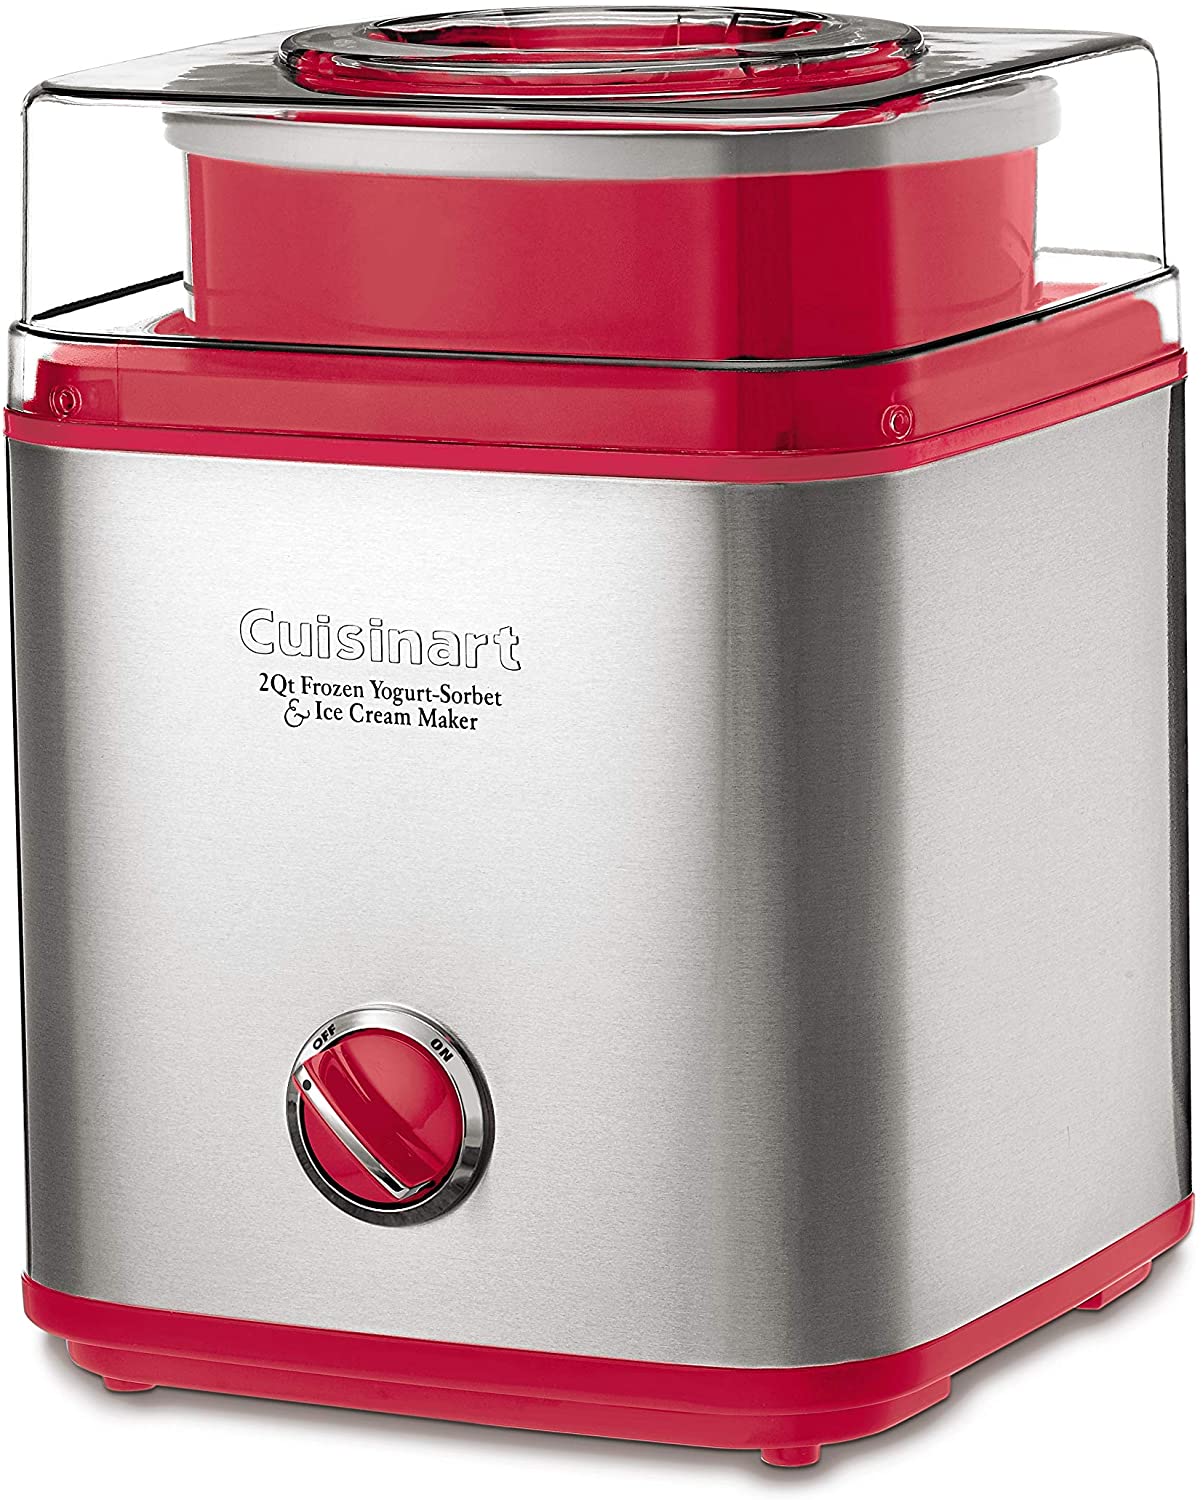 Cuisinart ICE-30RFR 2 QT Ice Cream Maker, Red - Certified Refurbished